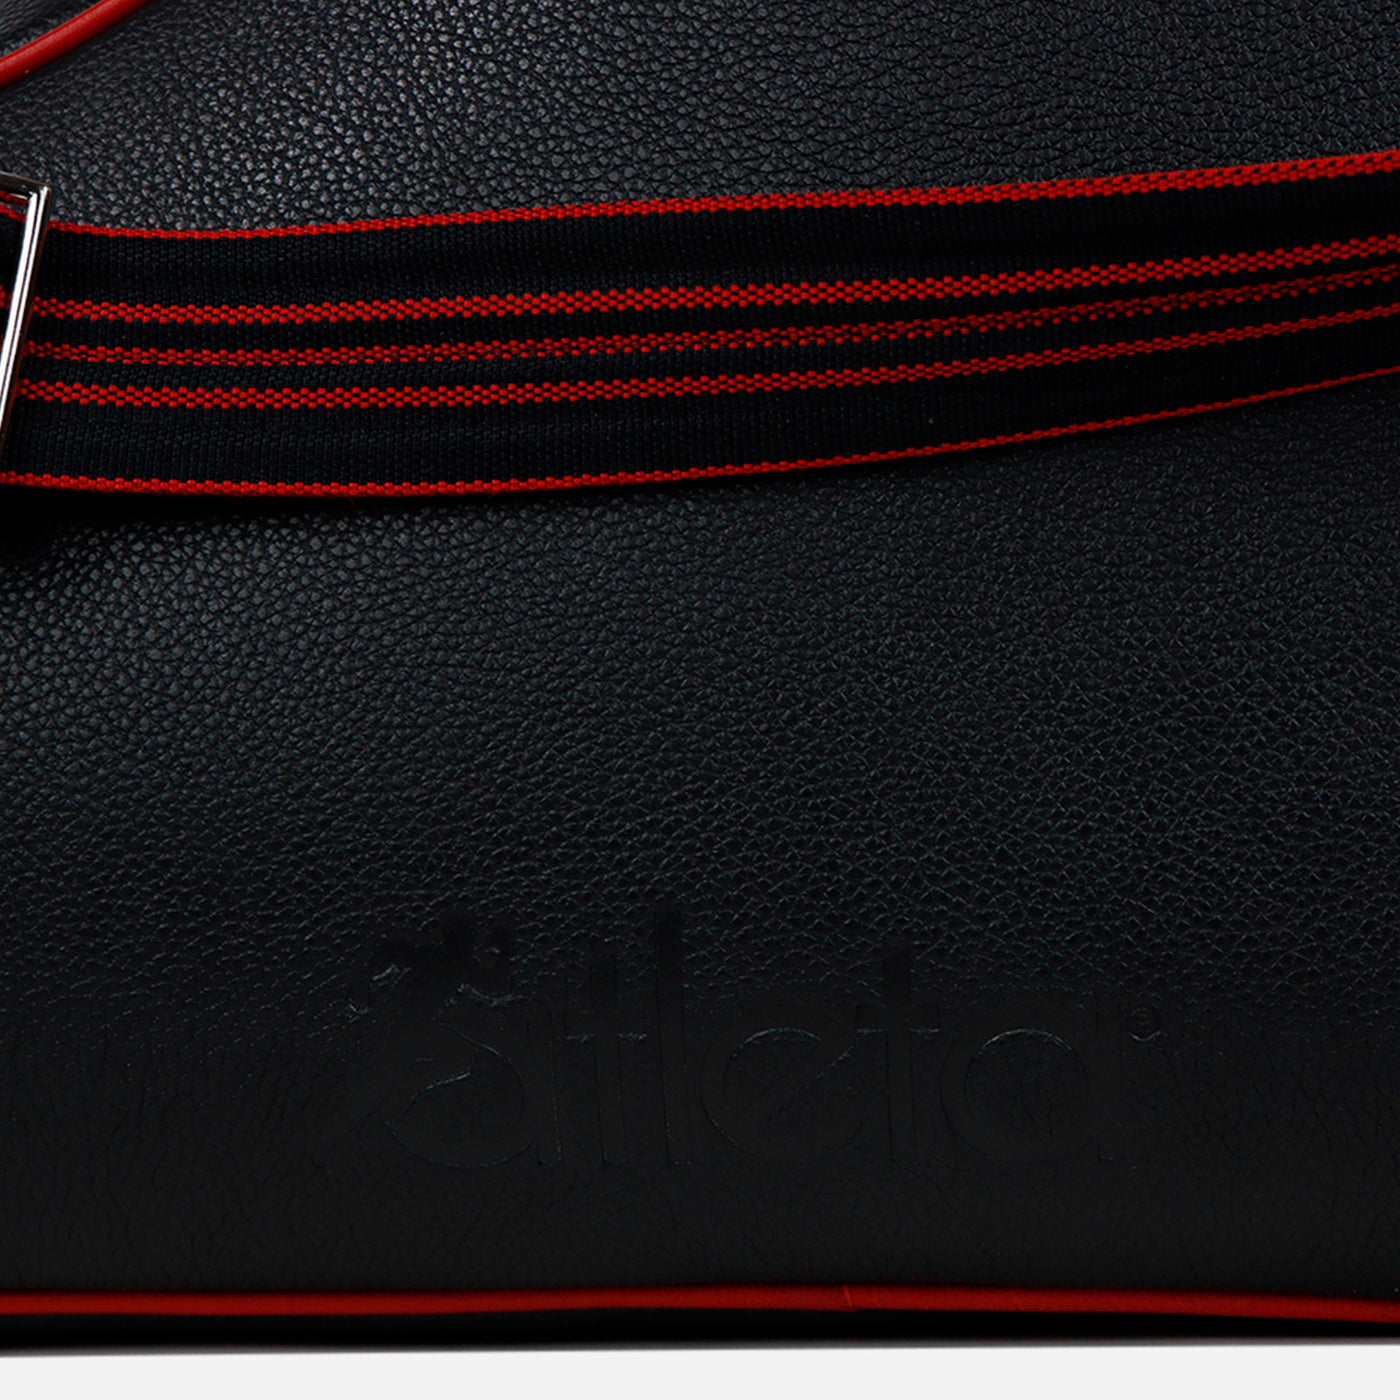 Red and Black Tennis Bag - Alternative view 4